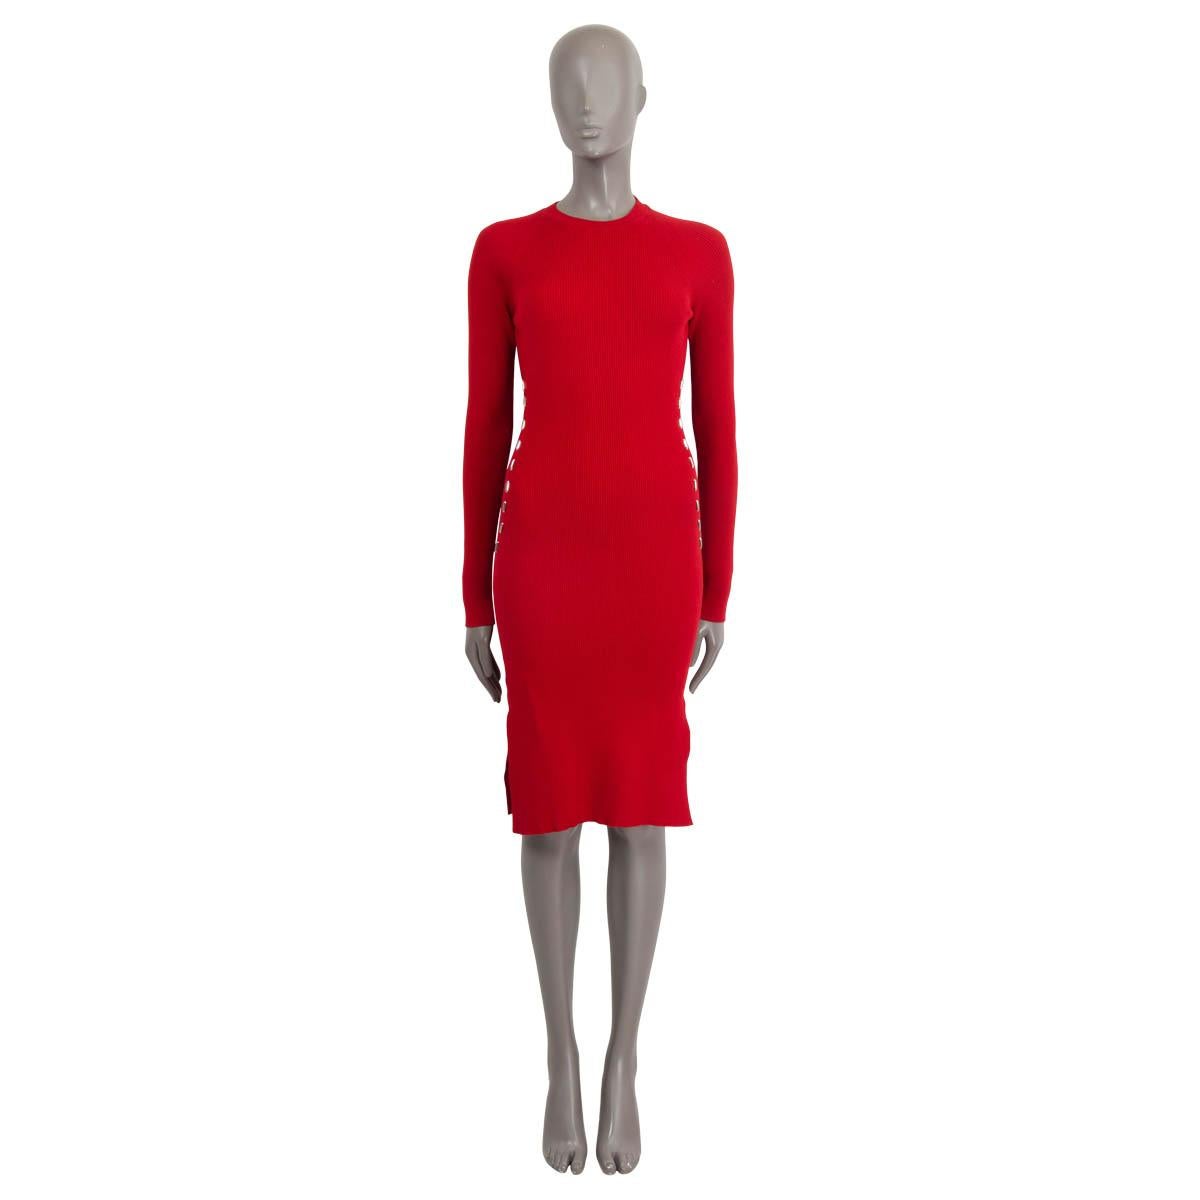 100% authentic Mugler studded rib knit bodycon dress in red viscose (72%) and elite (28%). Features long raglan sleeves (sleeve measurements taken from the neck) and a slit on the front and back. Unlined. Brand new, with tags.

Measurements
Tag